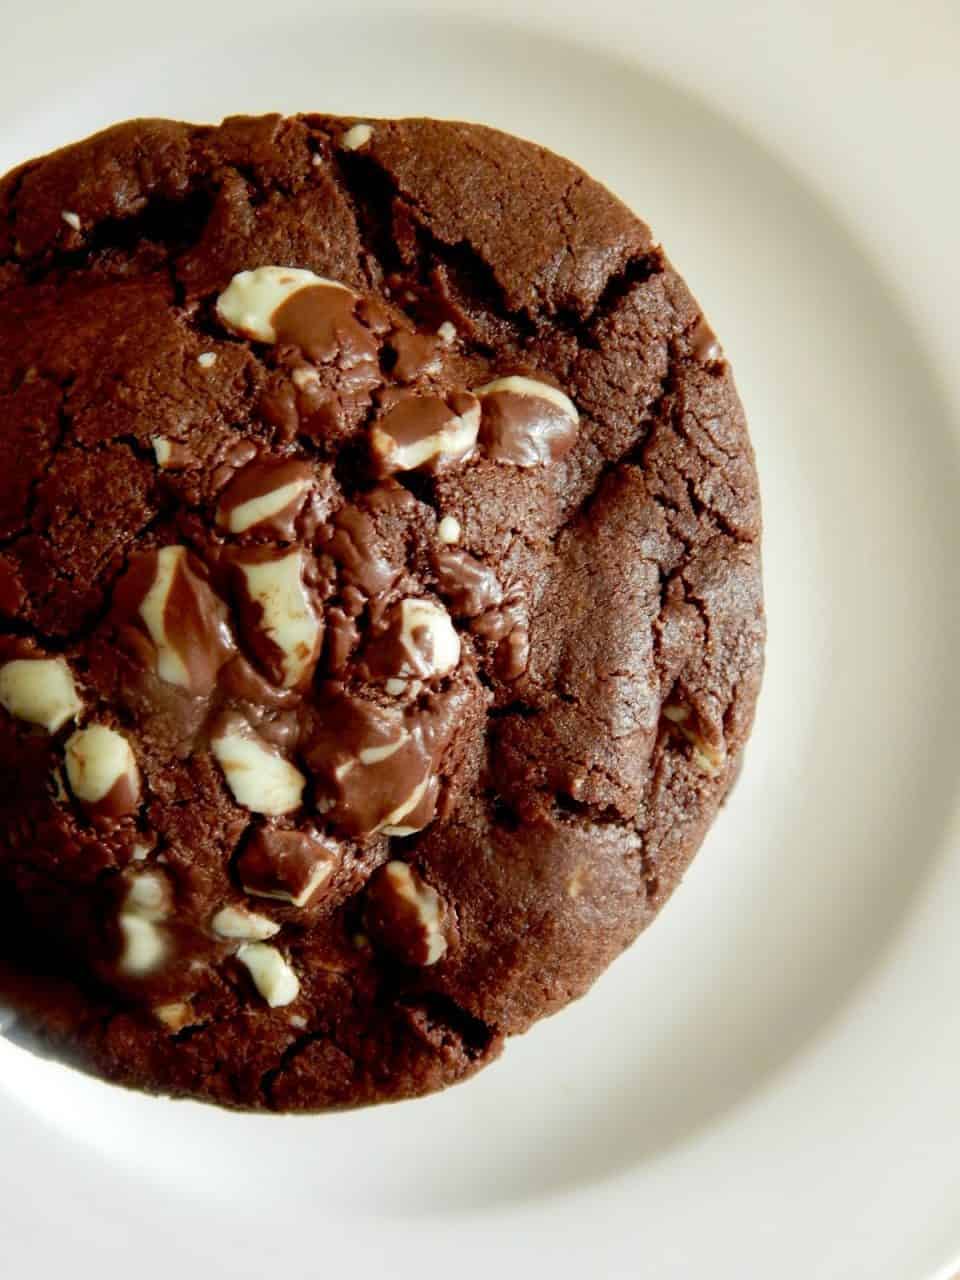 10 Recipes Inspired By Girl Scout Cookies 2 Daily Mom, Magazine For Families